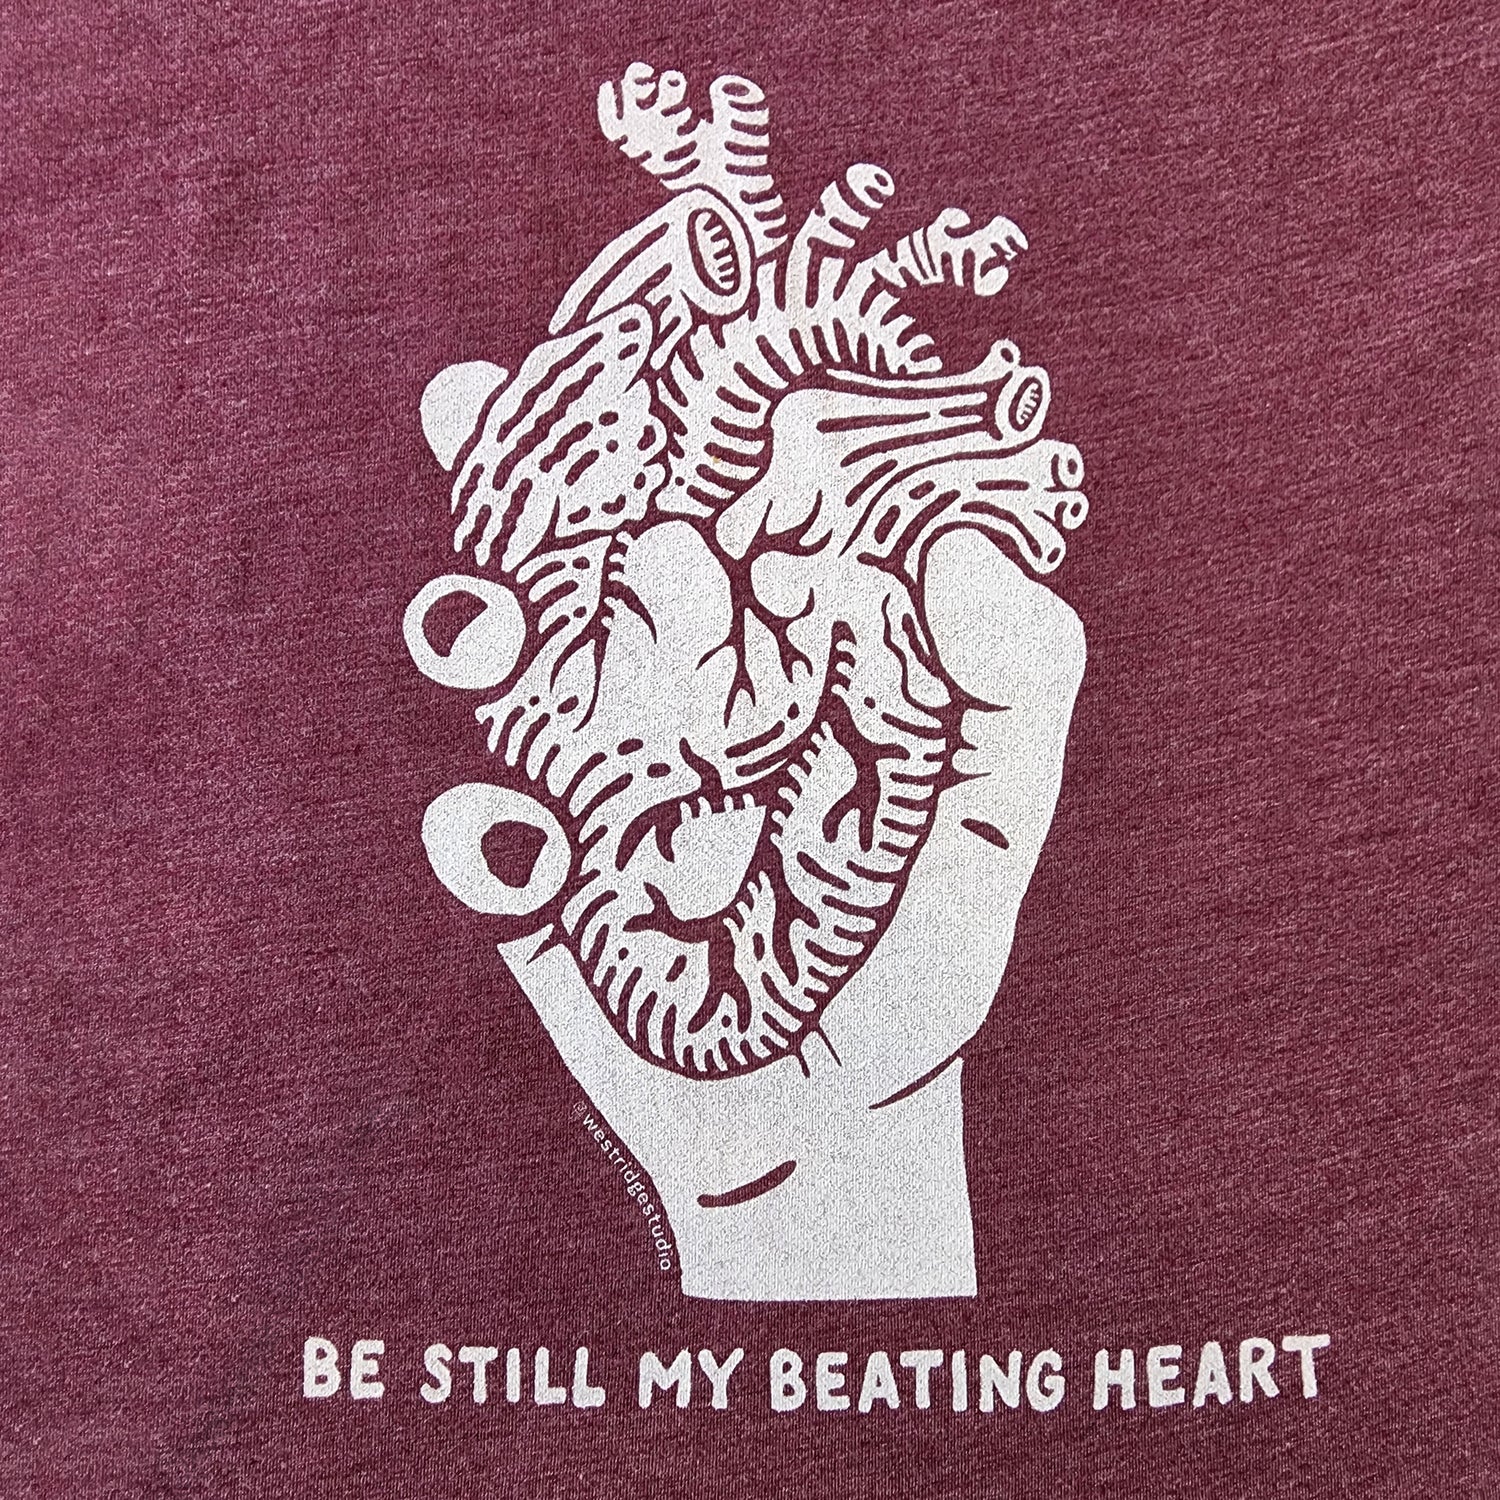 Be Still My Beating Heart graphic maroon tank top for women - detail of heart graphic